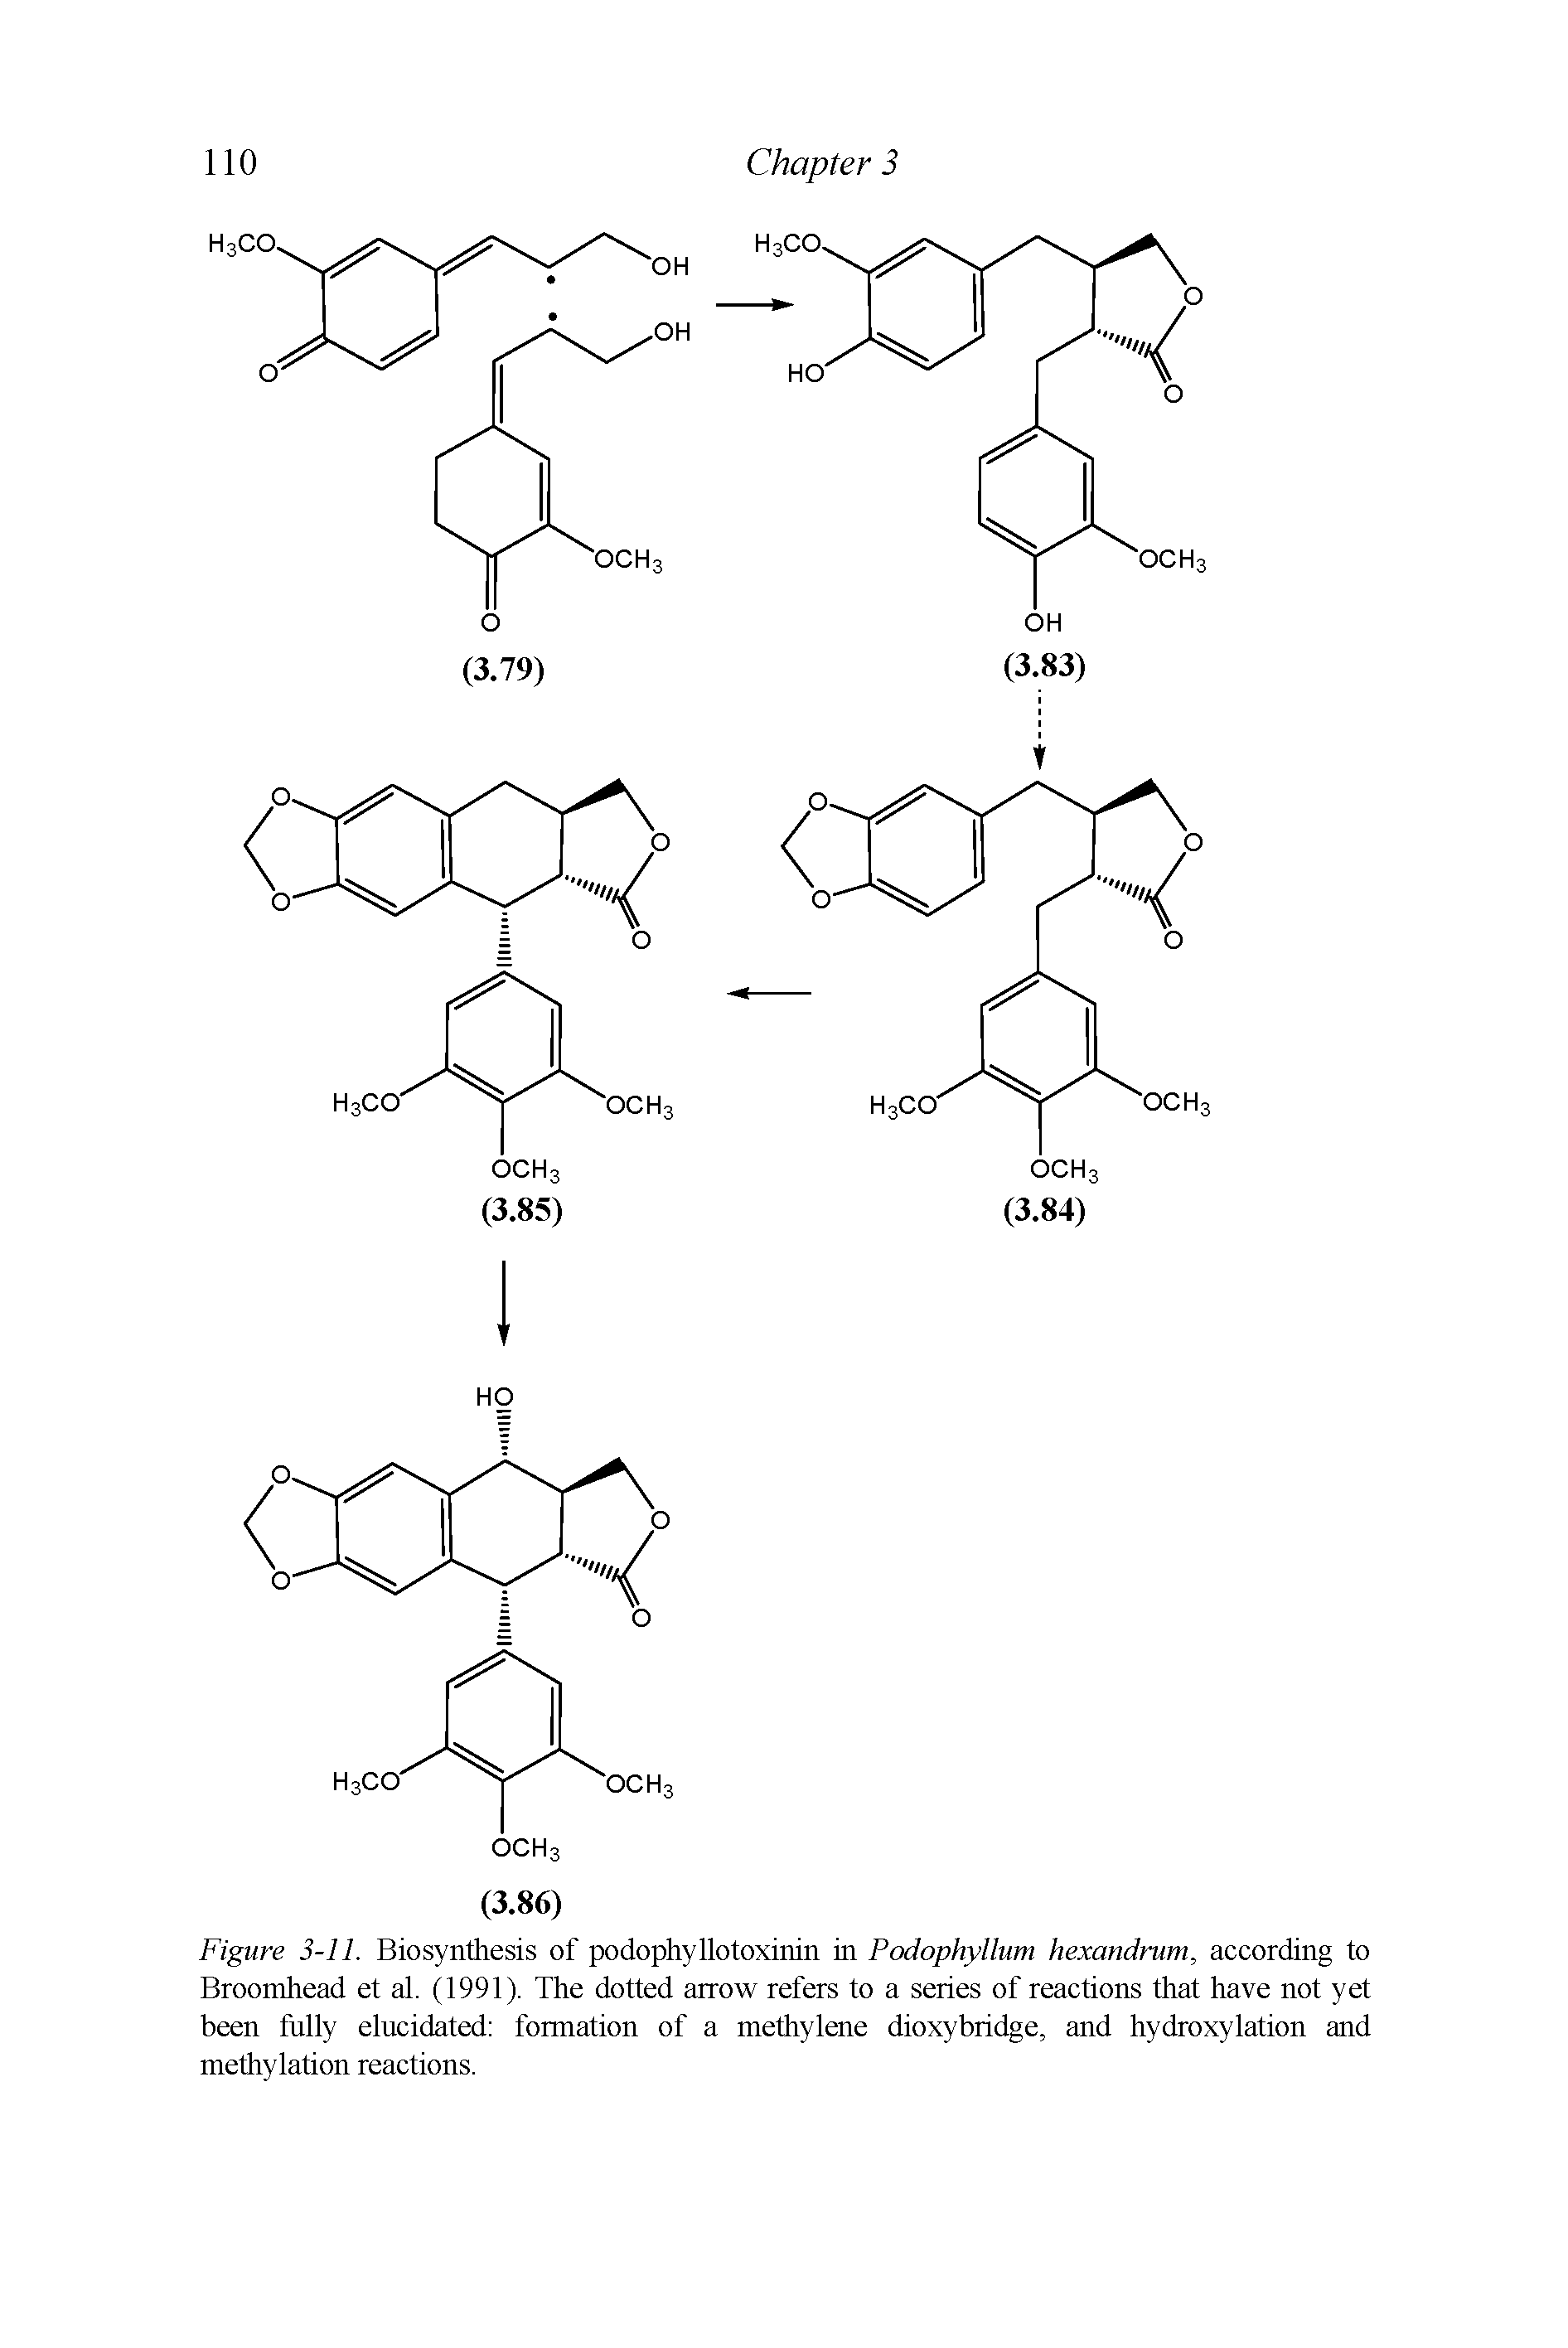 Figure 3-11. Biosynthesis of podophyllotoxinin in Podophyllum hexandrum, according to Broomhead et al. (1991). The dotted arrow refers to a series of reactions that have not yet been fully elucidated formation of a methylene dioxybridge, and hydroxylation and methylation reactions.